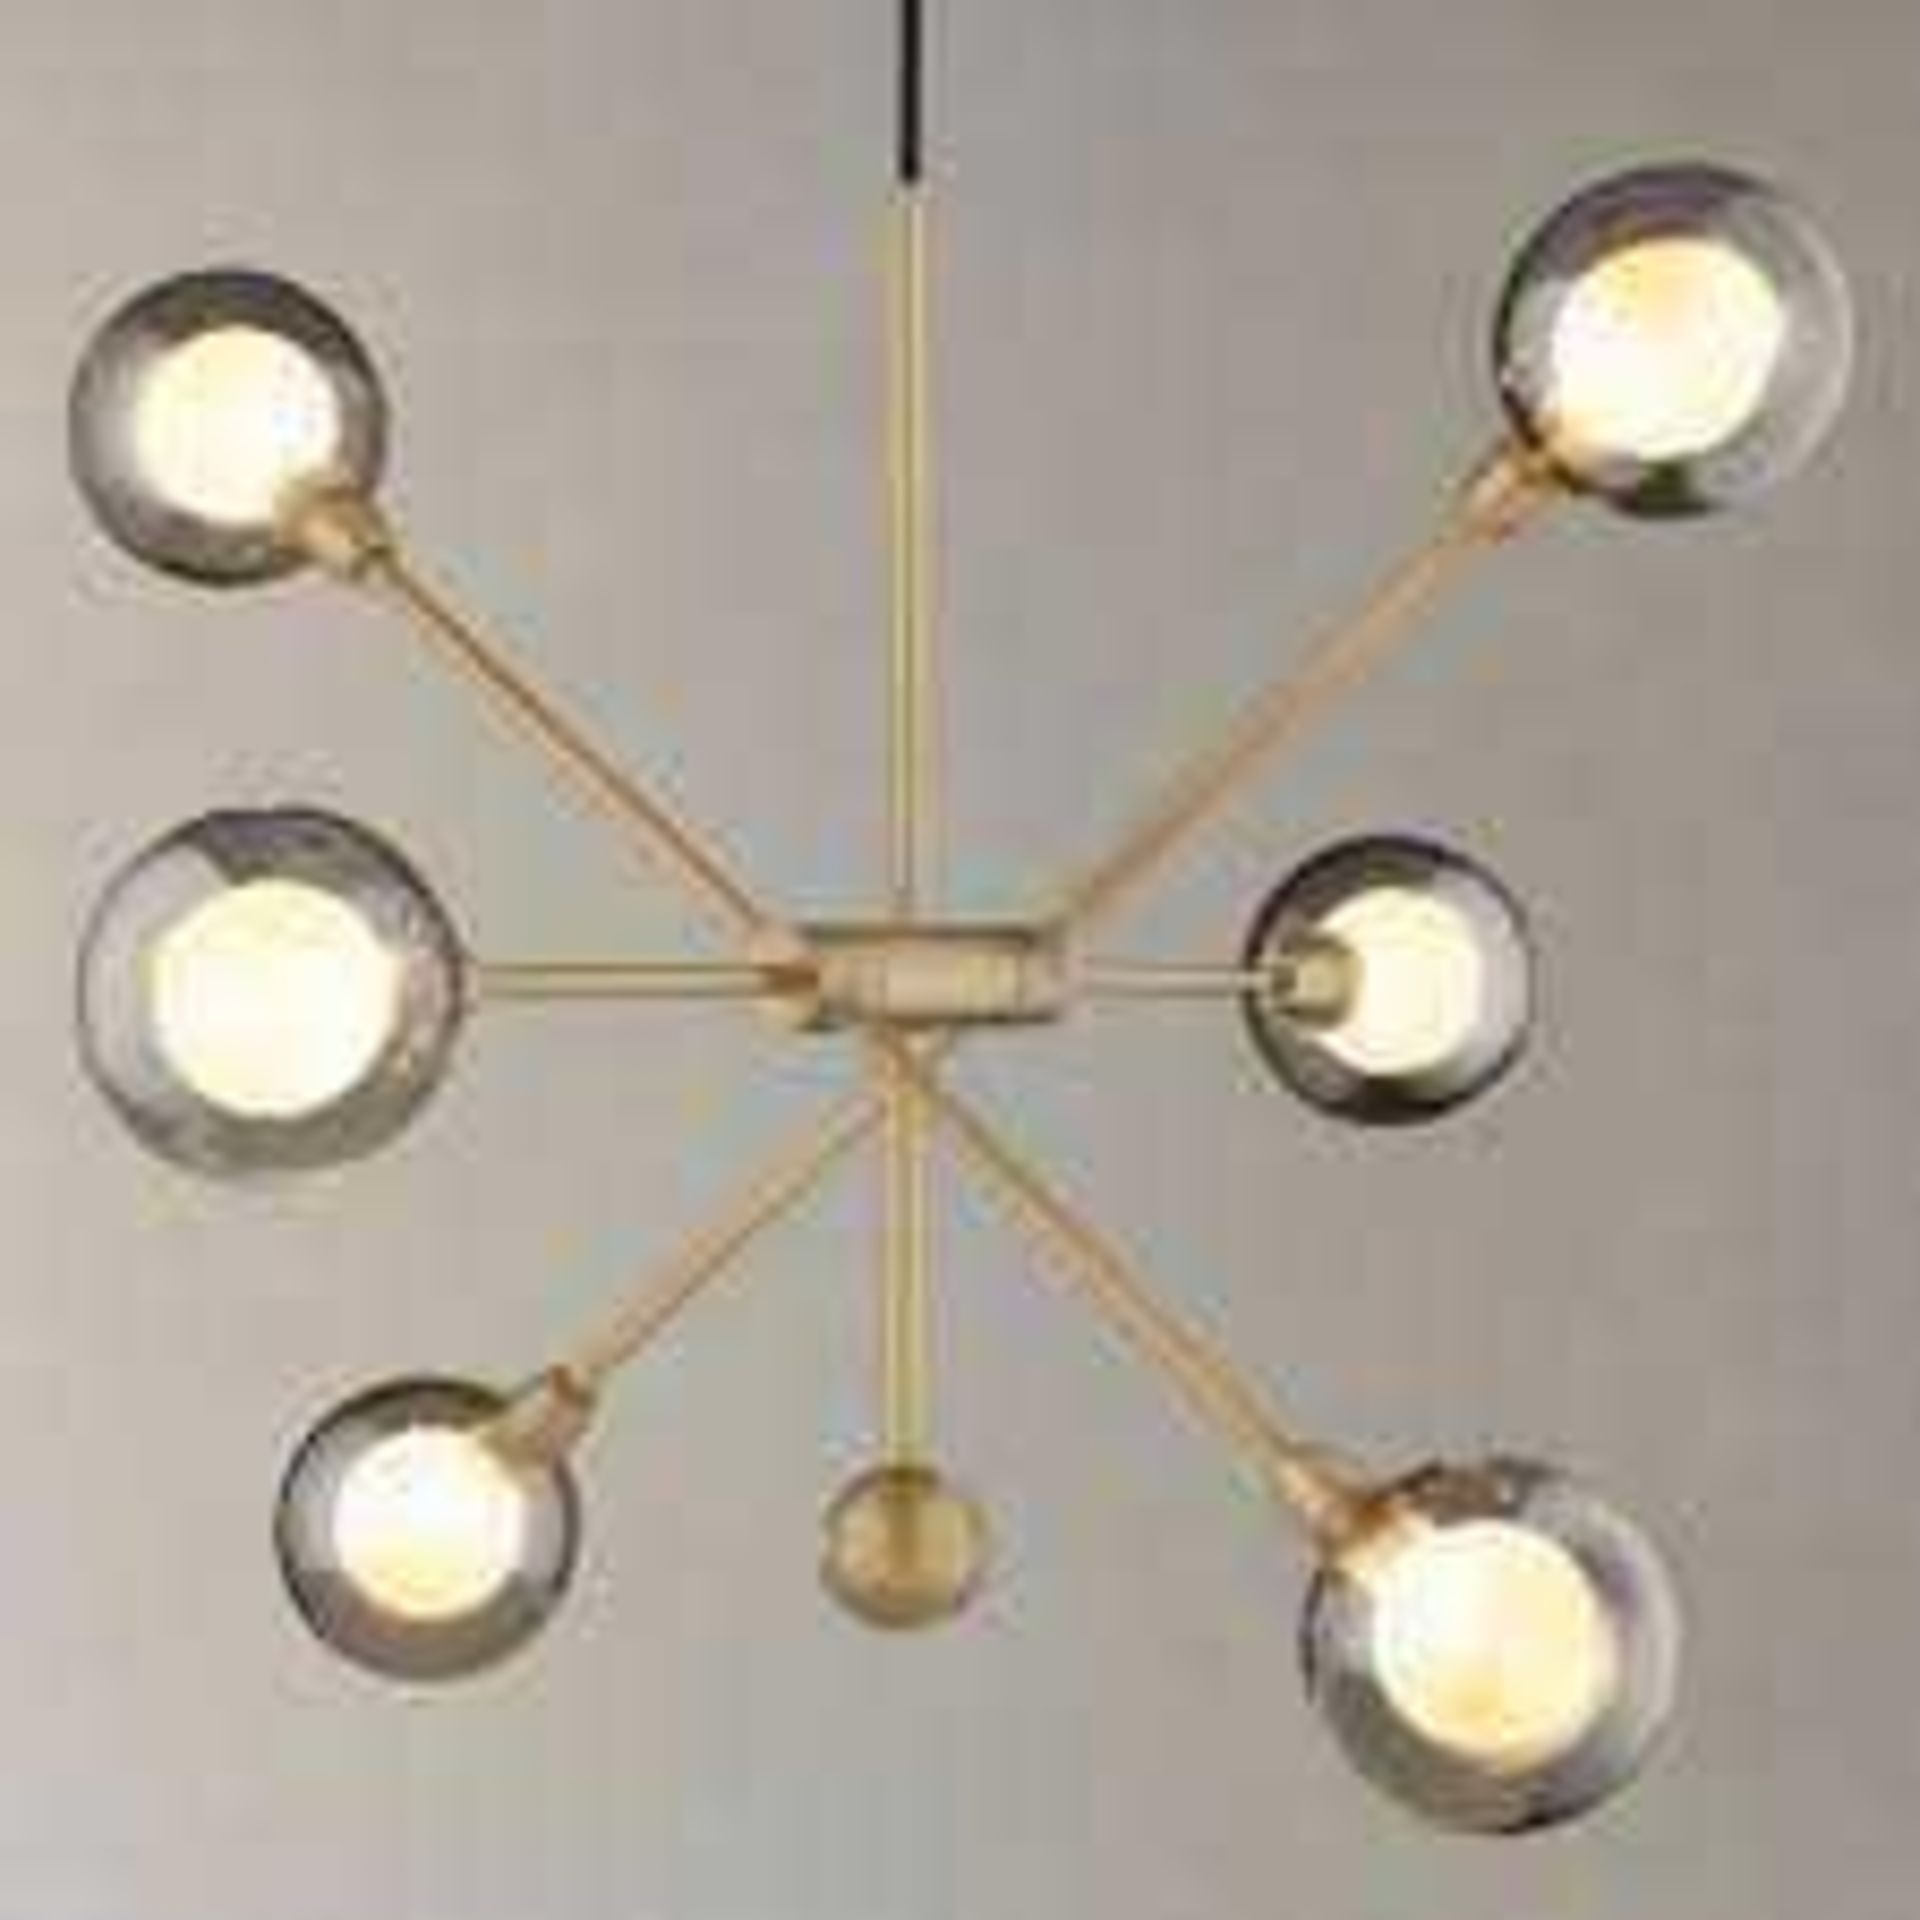 (Jb) RRP £210 Lot To Contain 1 Boxed John Lewis And Partners Huxley Ceiling Pendant Light In Brushed